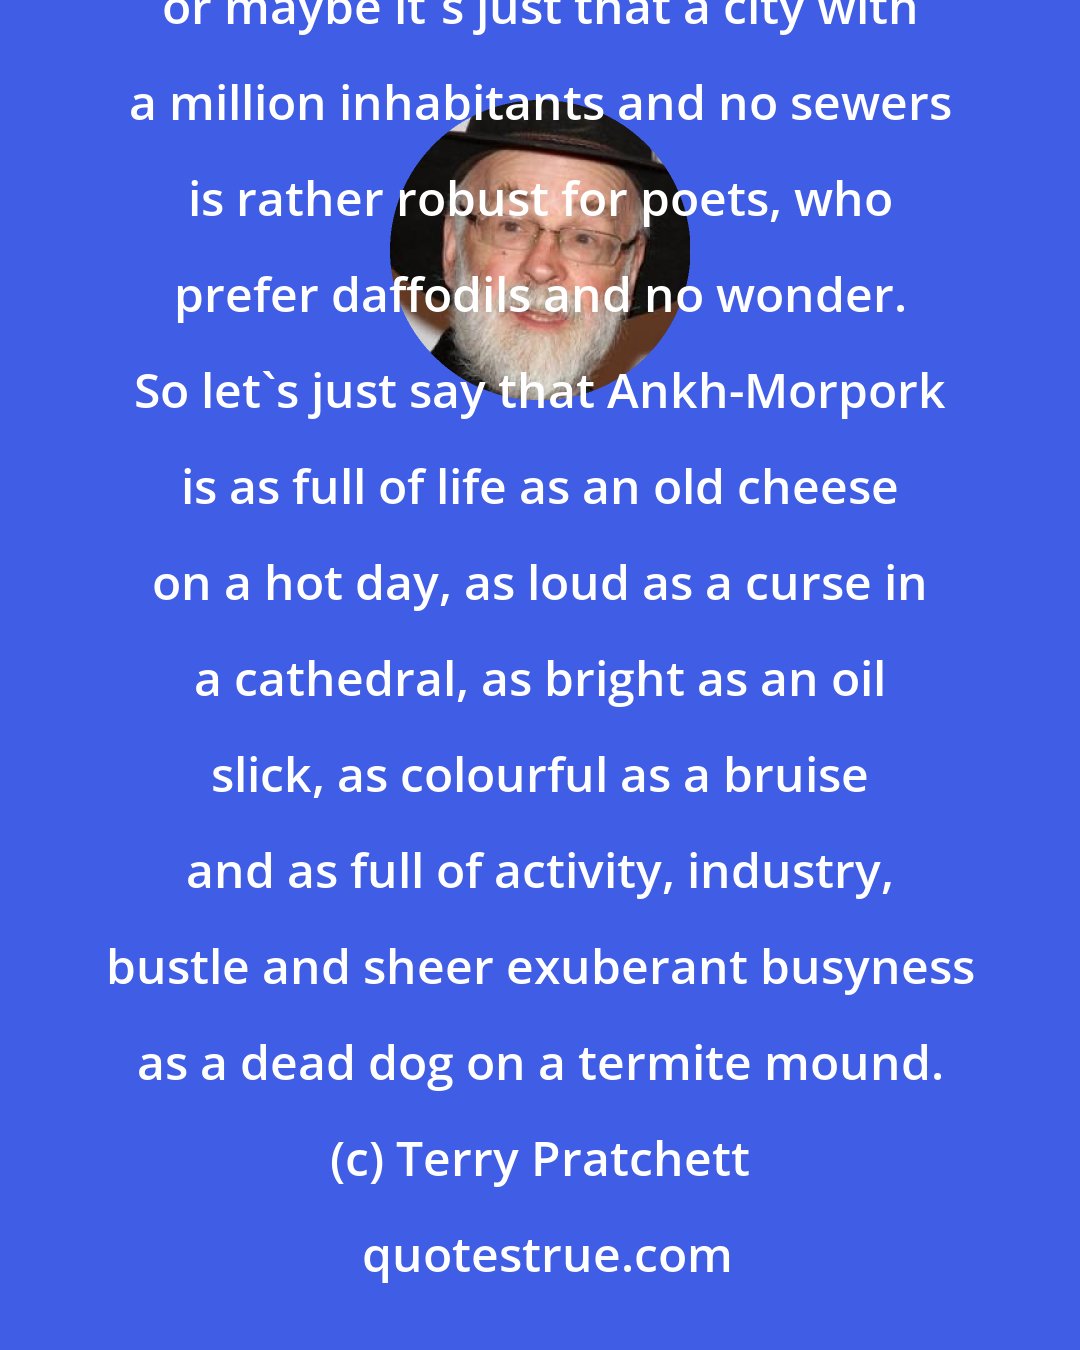 Terry Pratchett: Poets have tried to describe Ankh-Morpork. They have failed. Perhaps it's the sheer zestful vitality of the place, or maybe it's just that a city with a million inhabitants and no sewers is rather robust for poets, who prefer daffodils and no wonder. So let's just say that Ankh-Morpork is as full of life as an old cheese on a hot day, as loud as a curse in a cathedral, as bright as an oil slick, as colourful as a bruise and as full of activity, industry, bustle and sheer exuberant busyness as a dead dog on a termite mound.